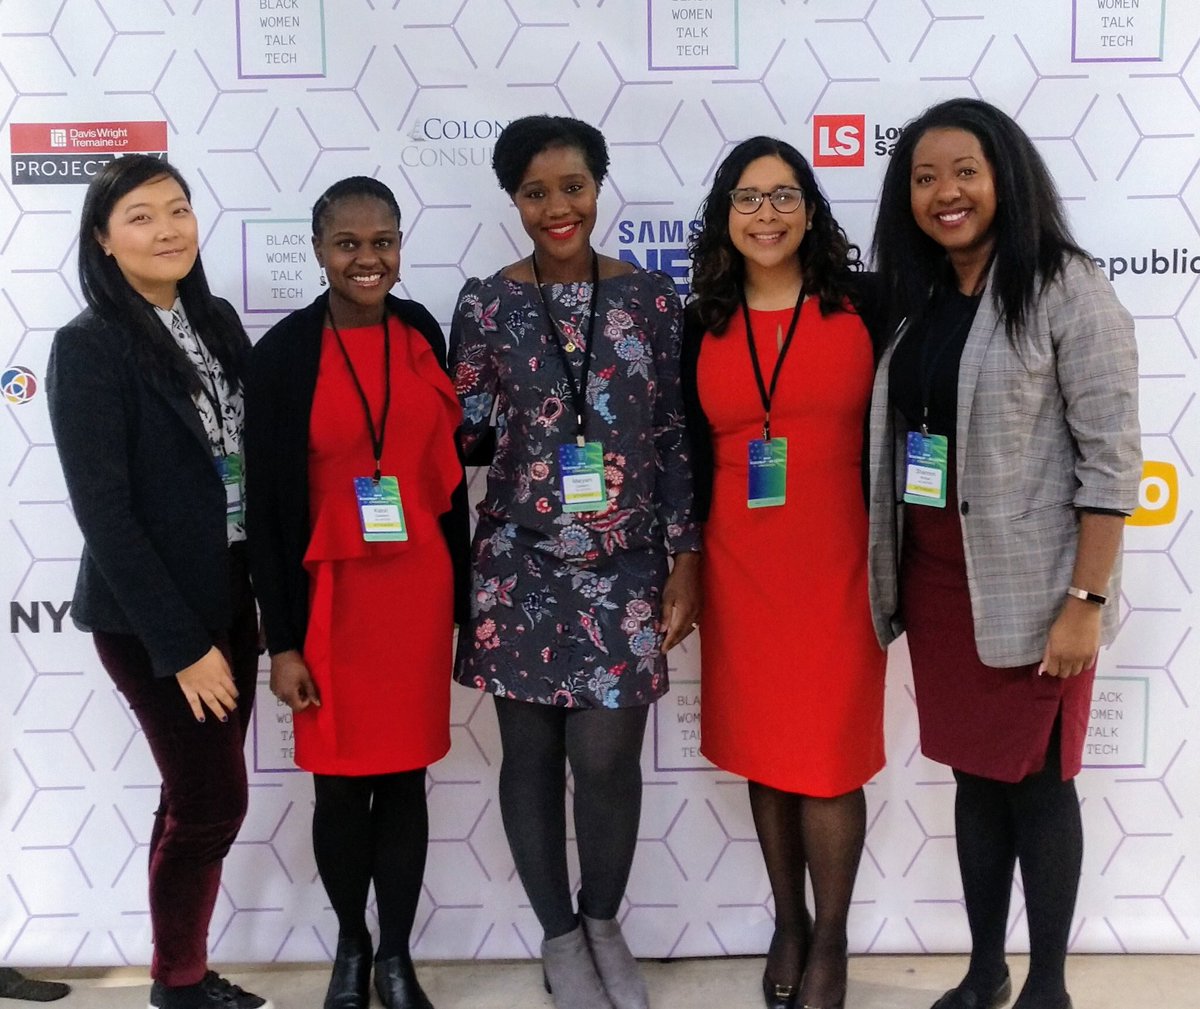 Just a few of your favorite @dwtProjectW ladies representing @DWTLaw at @BWTalkTech’s #RoadmapToBillions! If you met us at #BWTTCon2019, we’d love to keep in touch! Tweet us! Cc: @CasbarroMaryam @KatoriCope credit to @lynnloacker our #ProjectW queen and photog :)